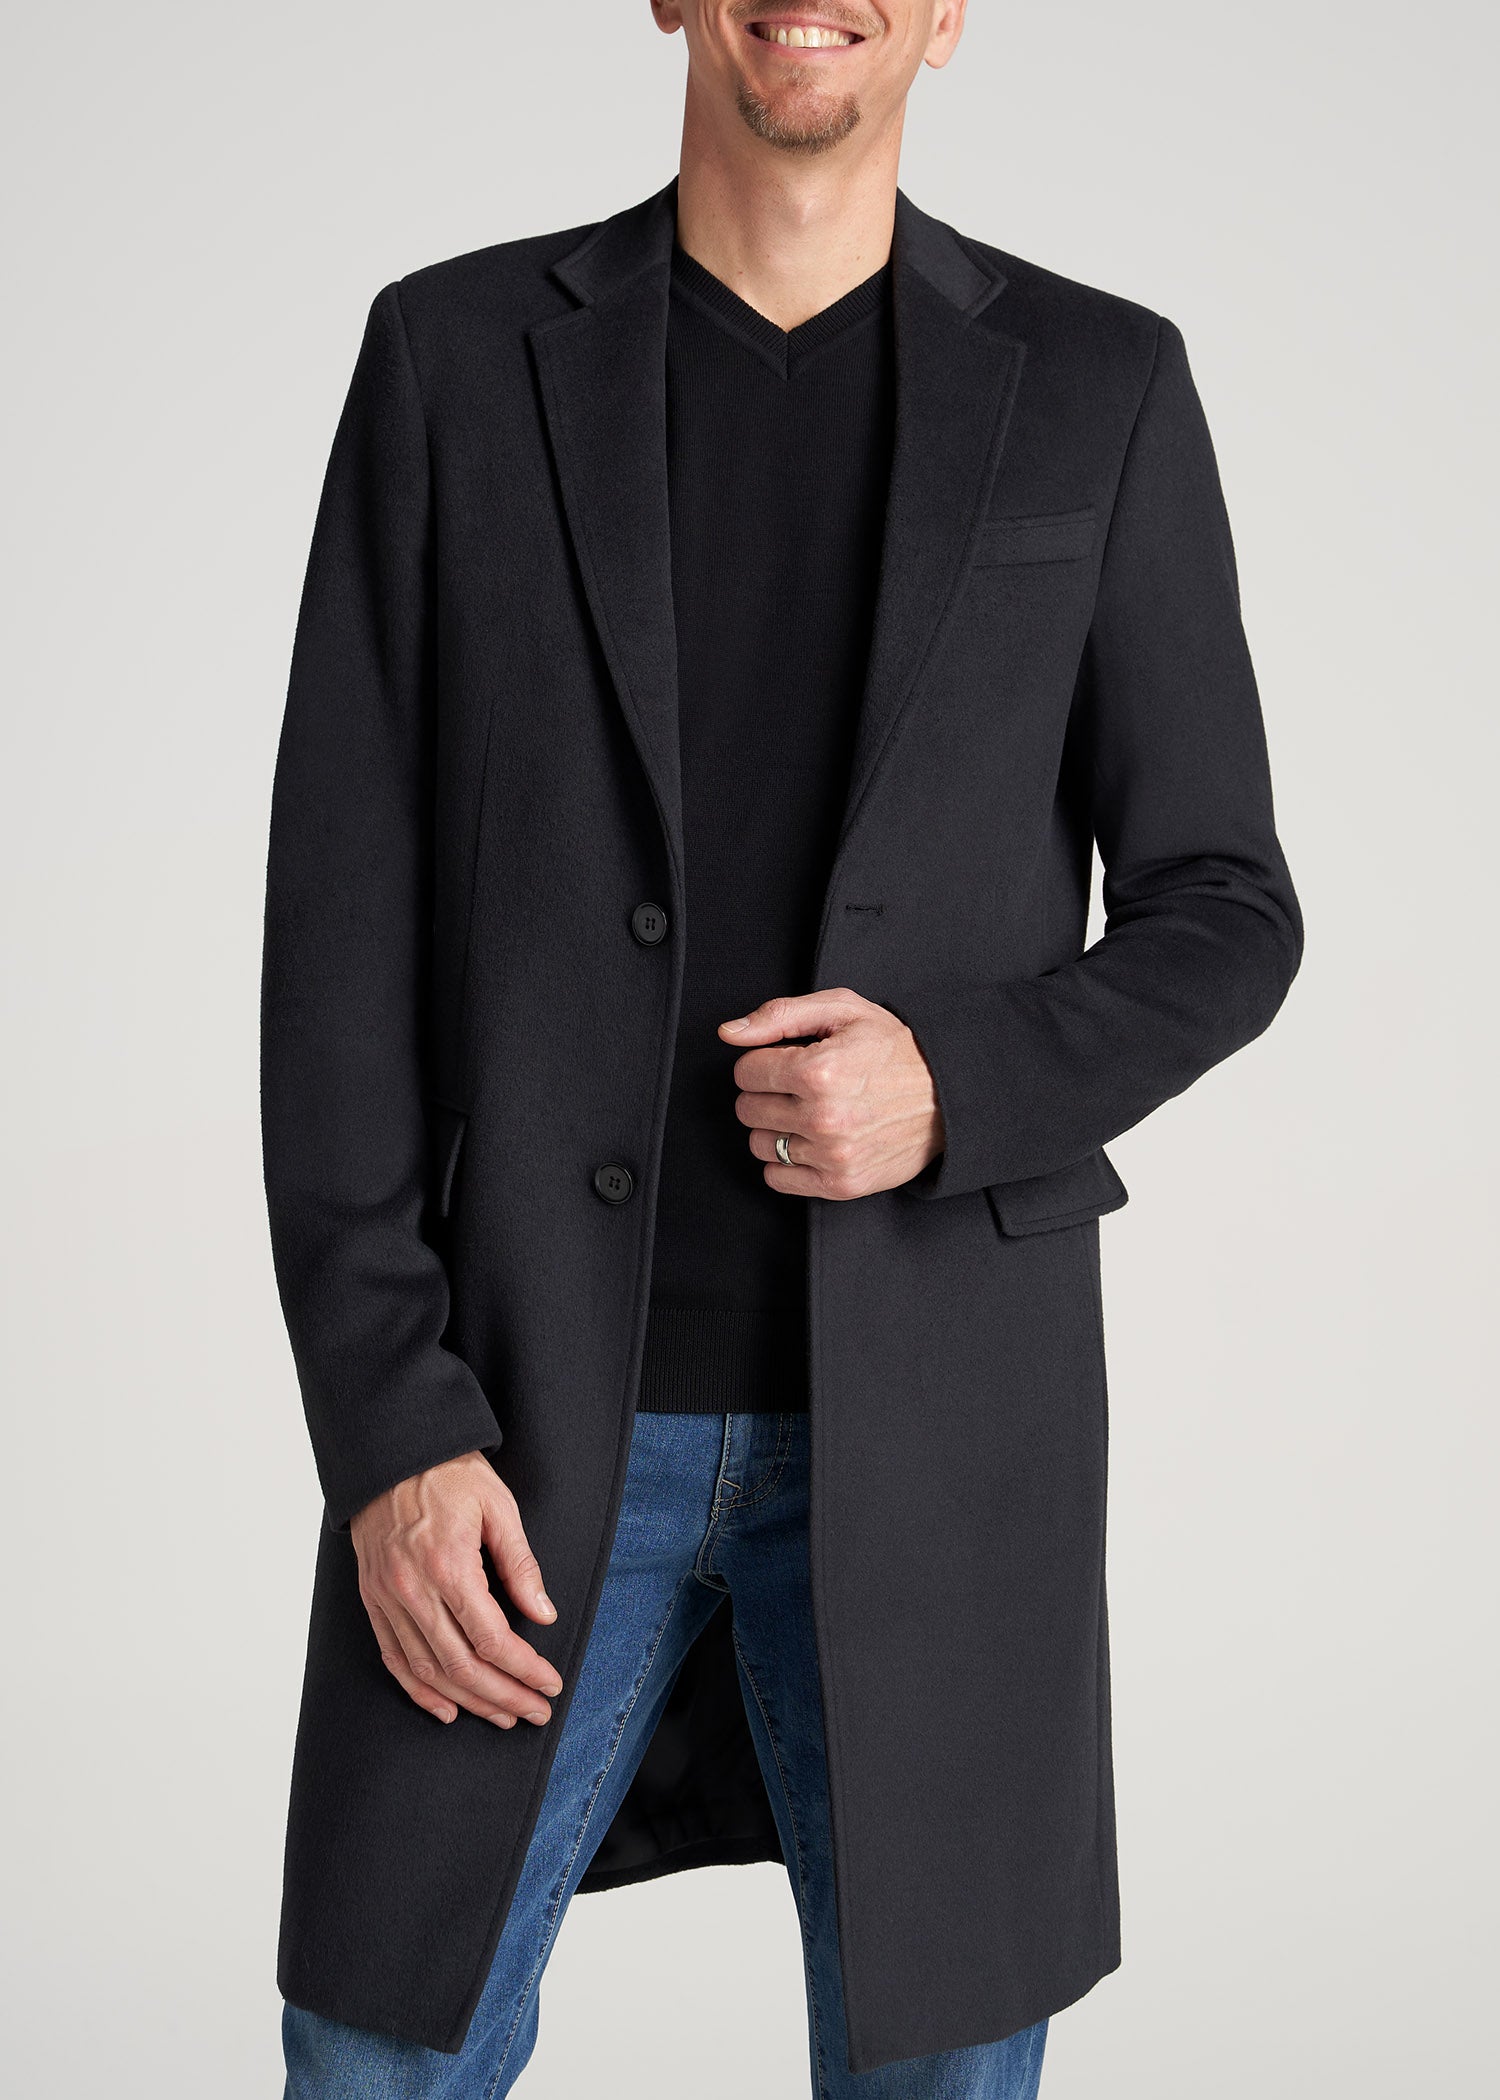 Wool Coat For Tall Men In Charcoal Mix | tunersread.com